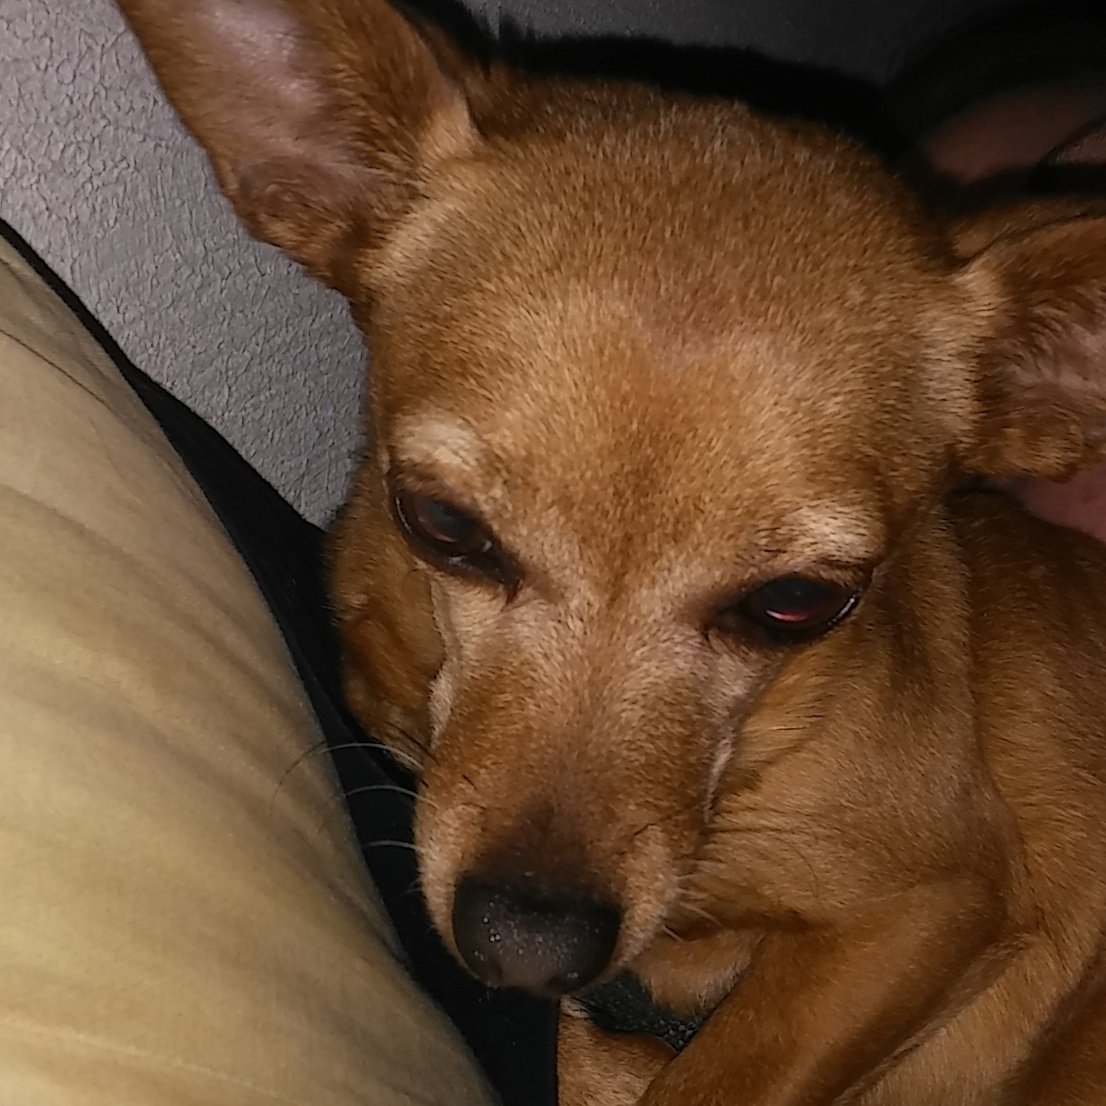 Cuddle with the wiggles. #chiweenie #dogs #smalldoglove